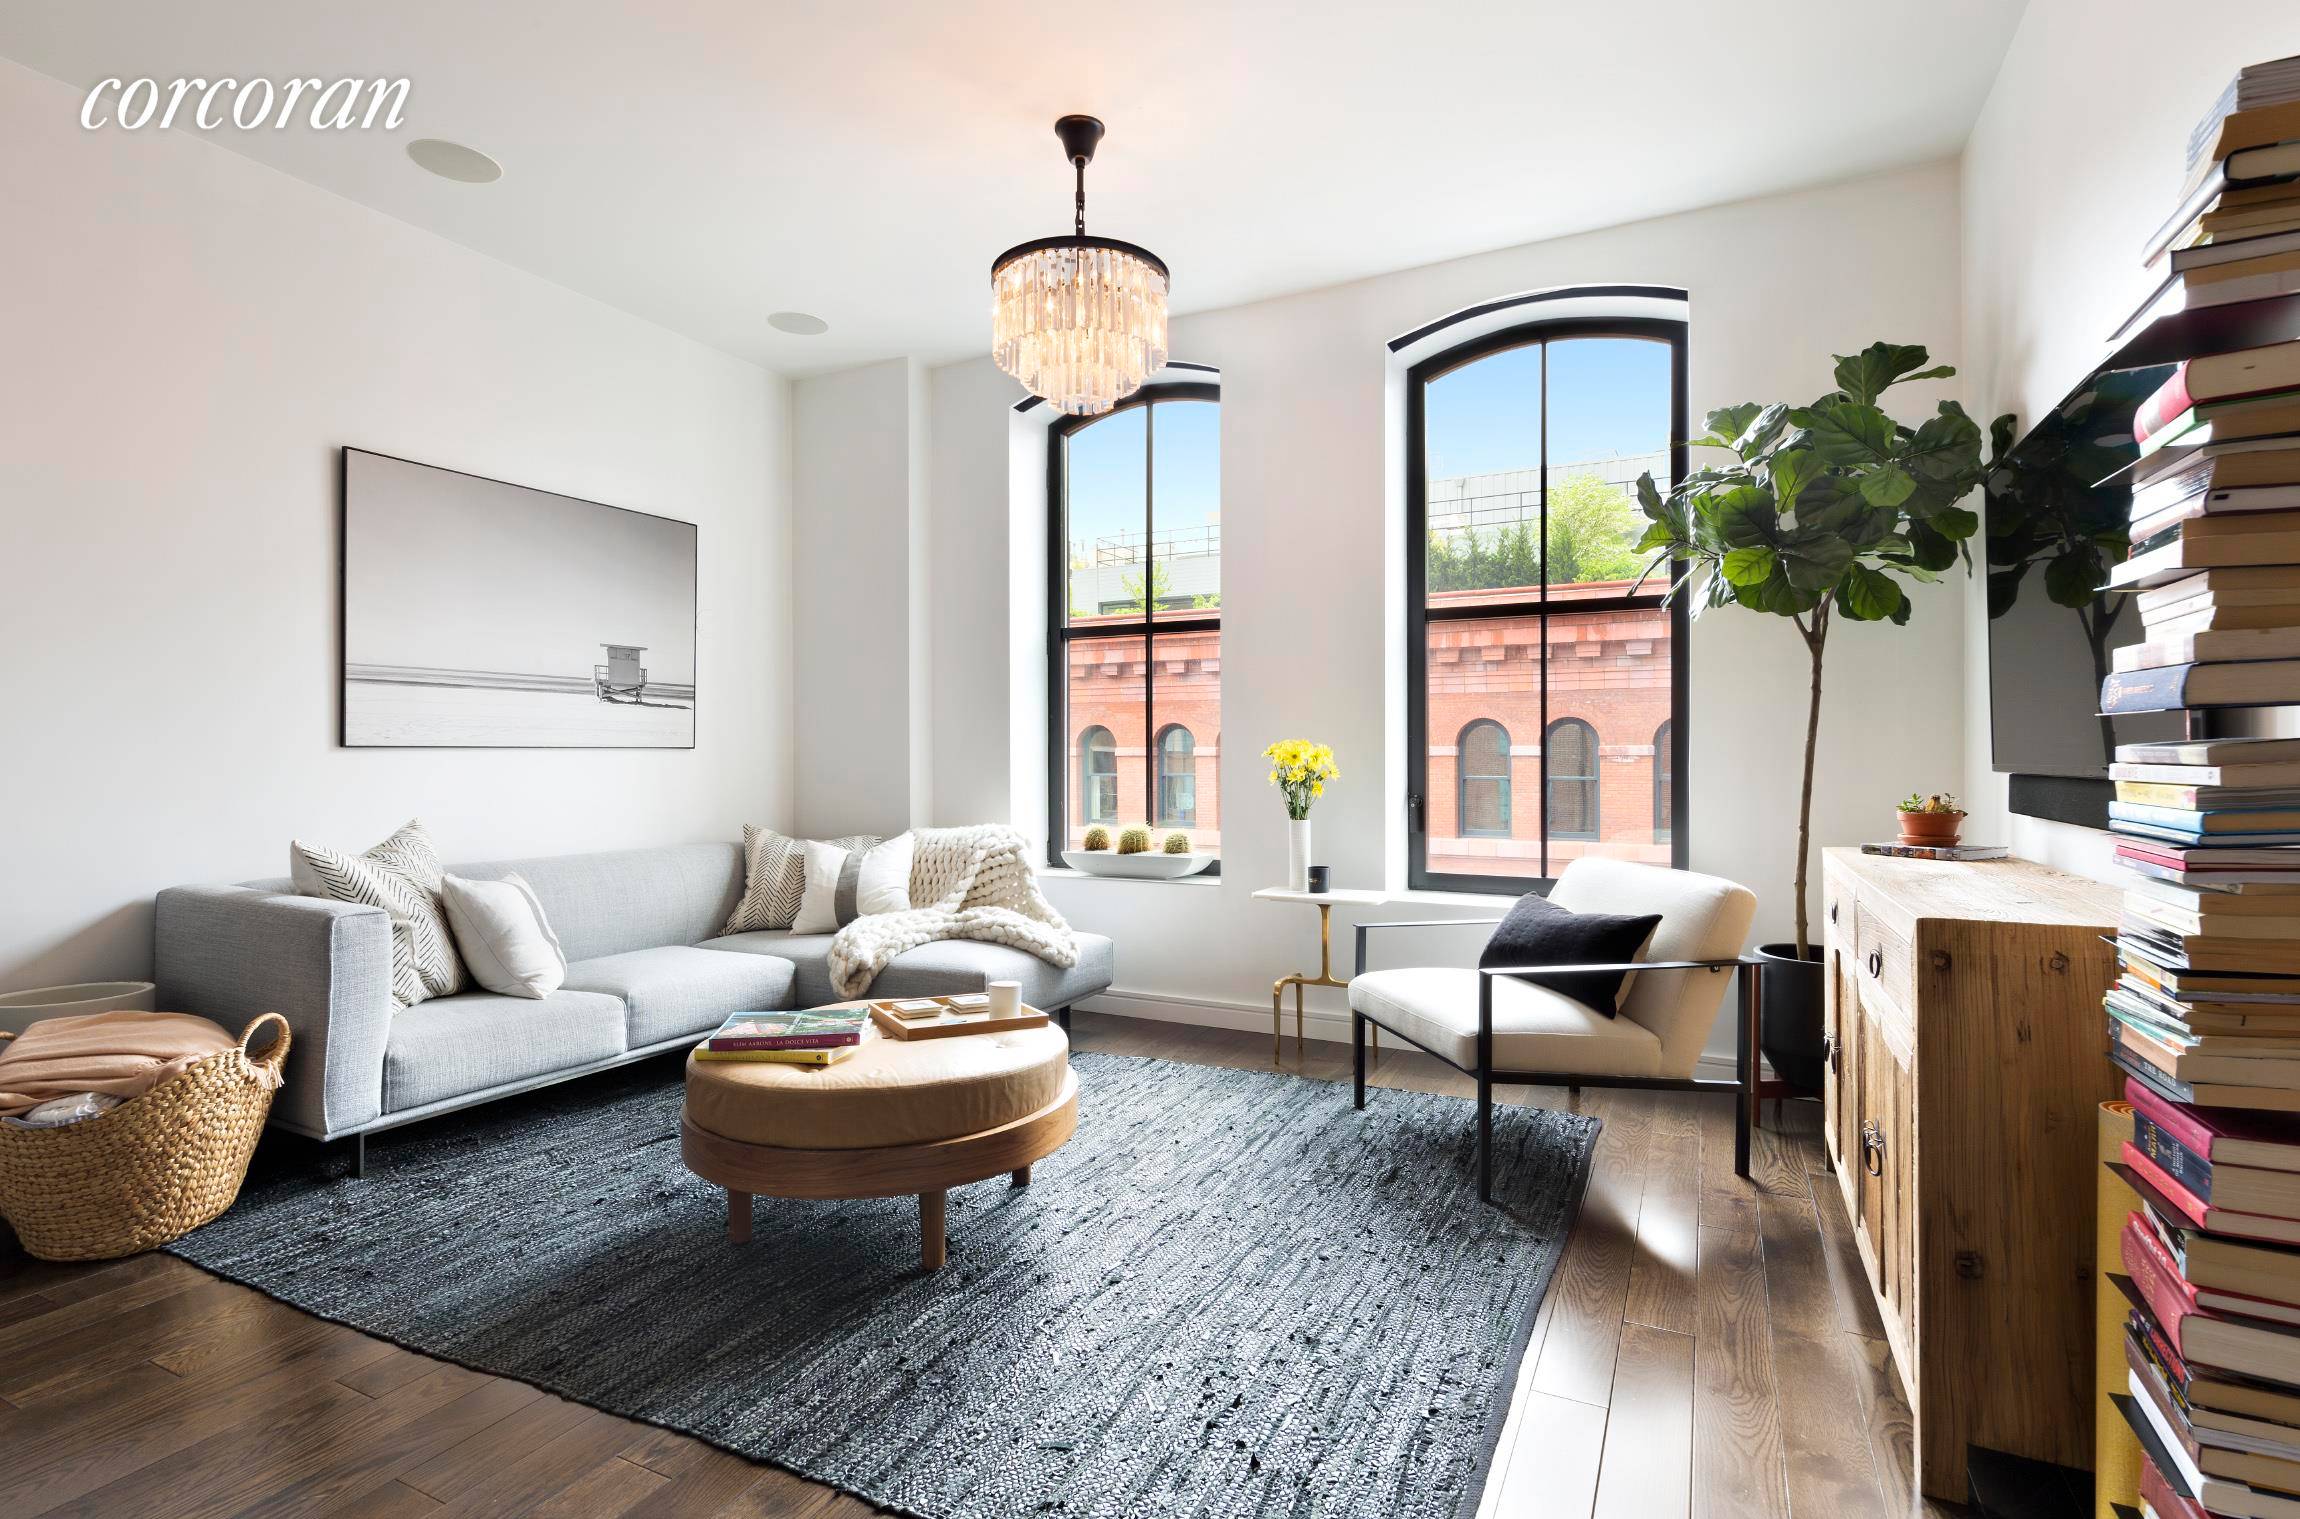 Apartment 6K at the coveted building, 250 West Street, is 1035 square feet of oversized loft living in the heart of Tribeca.